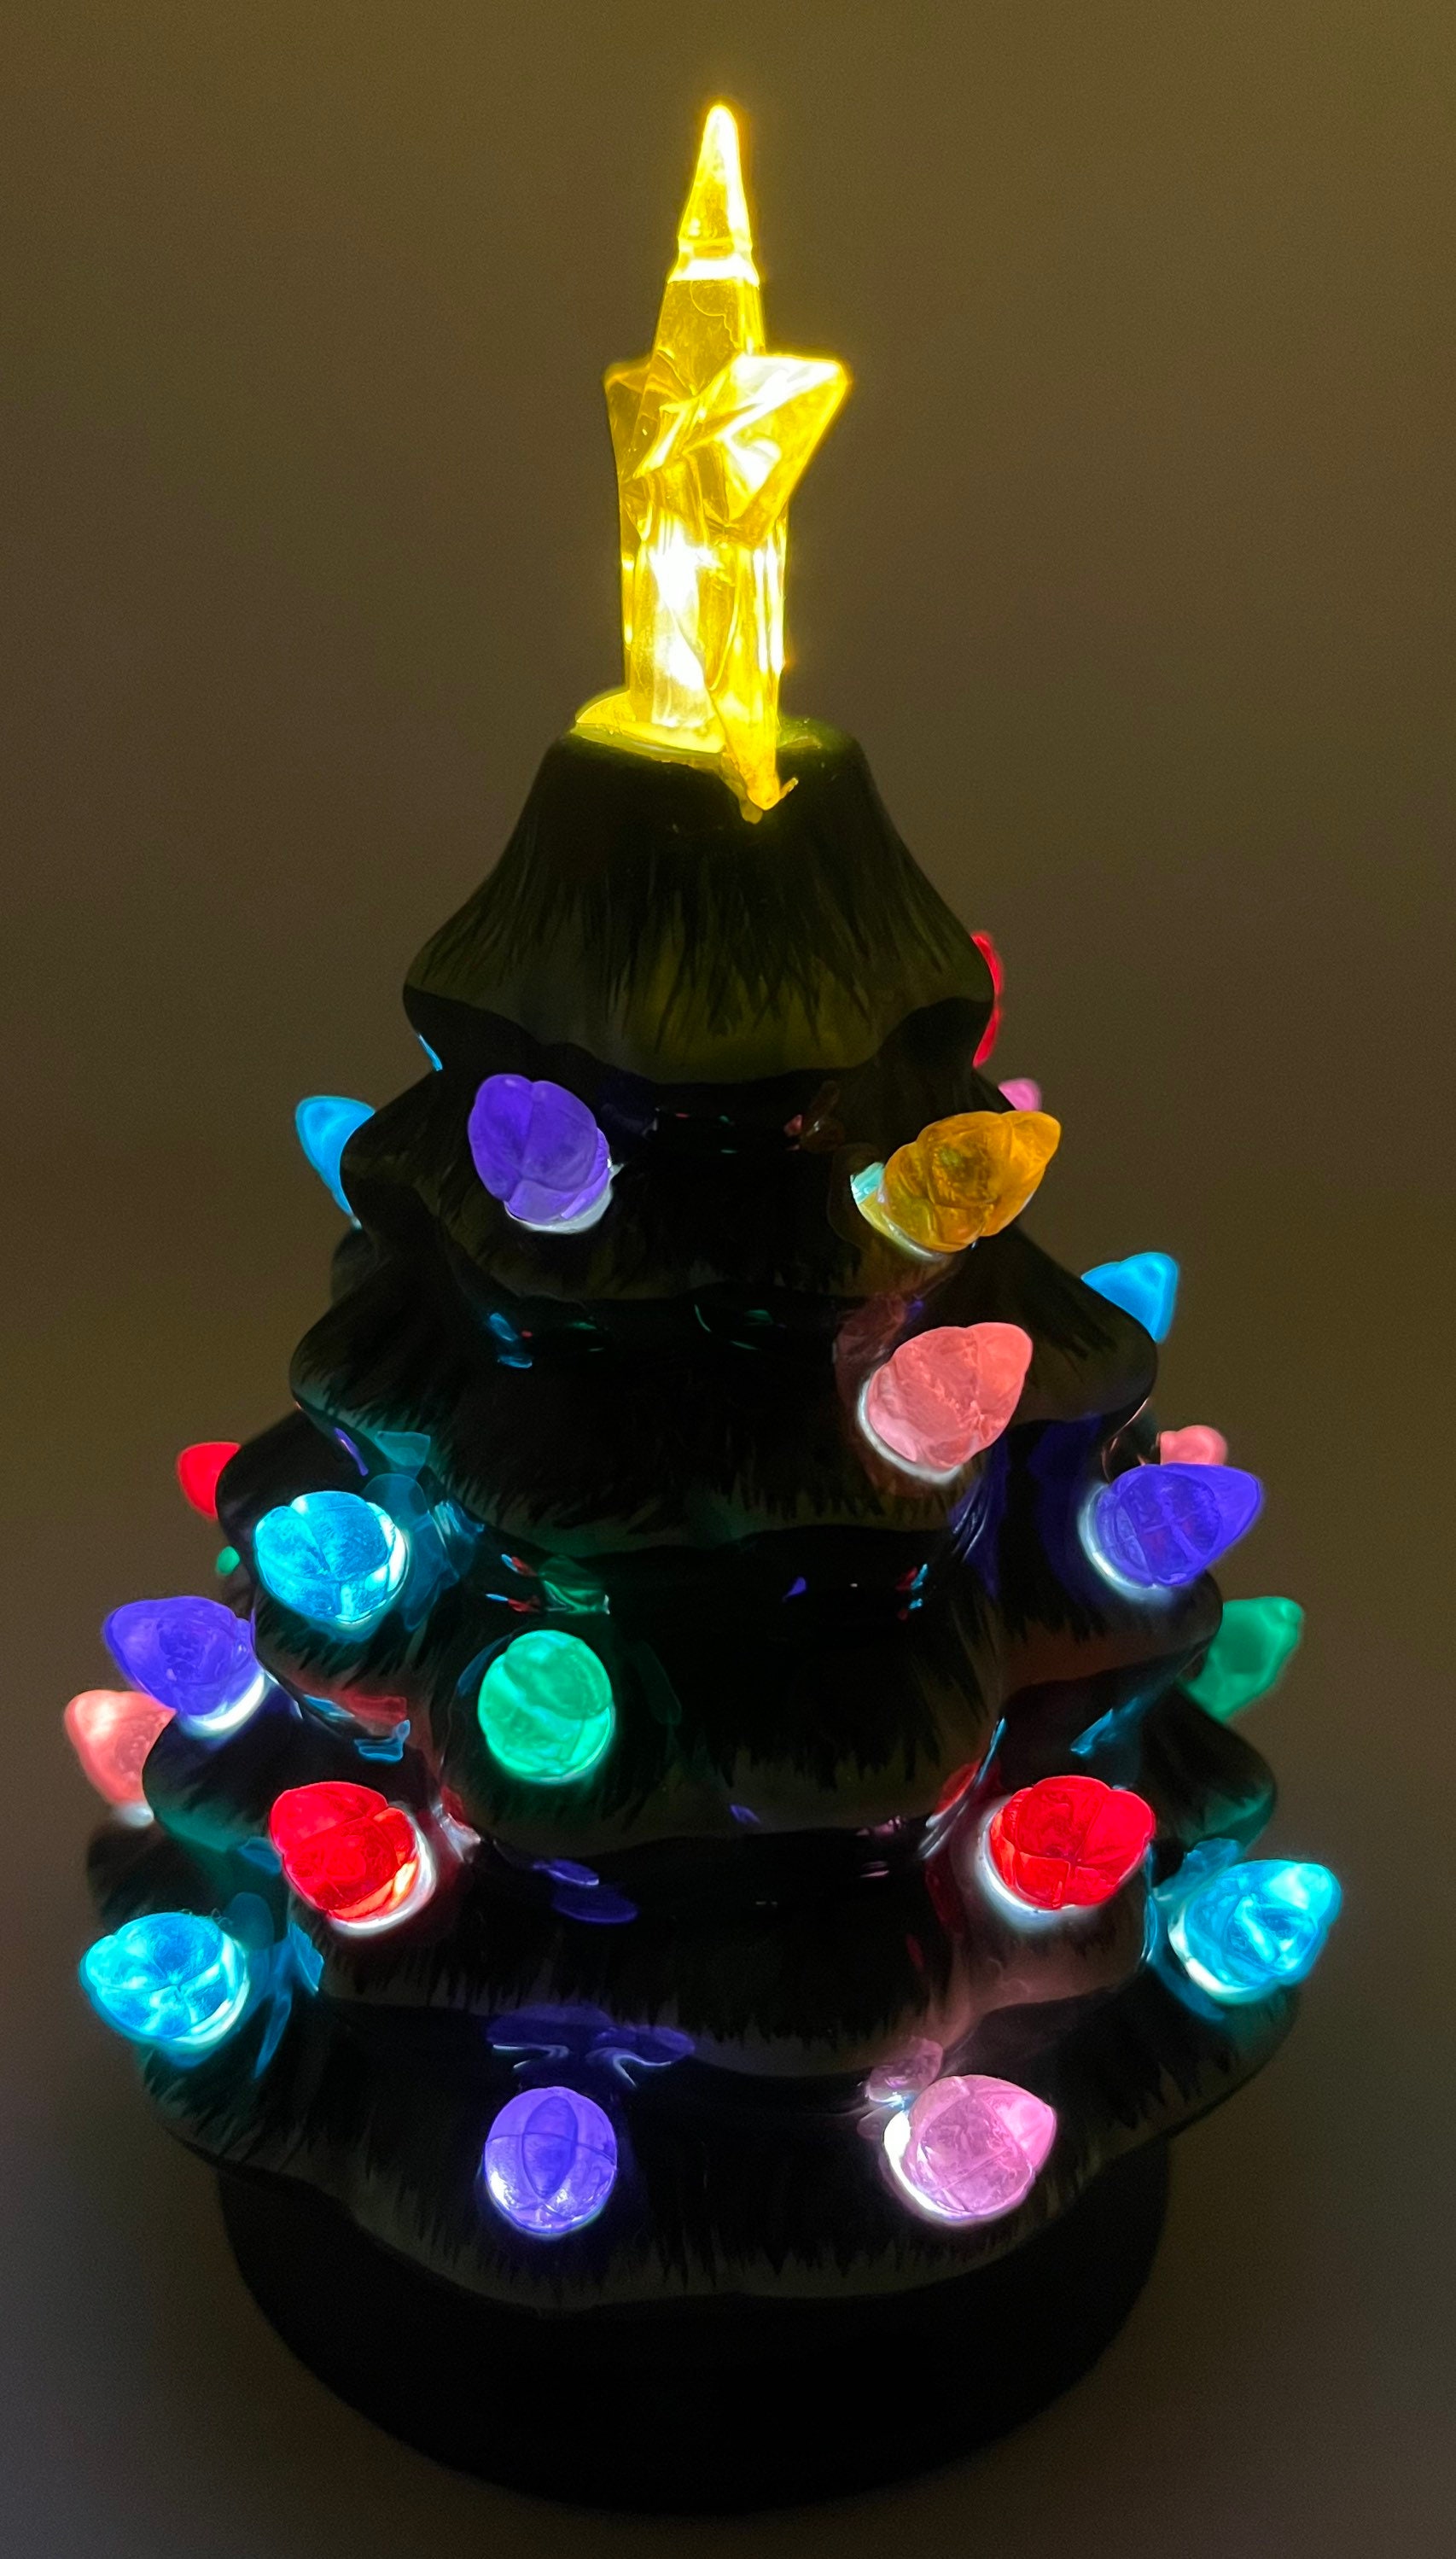 6 Inch Green Ceramic Christmas Tree With Multi-colored Lights 